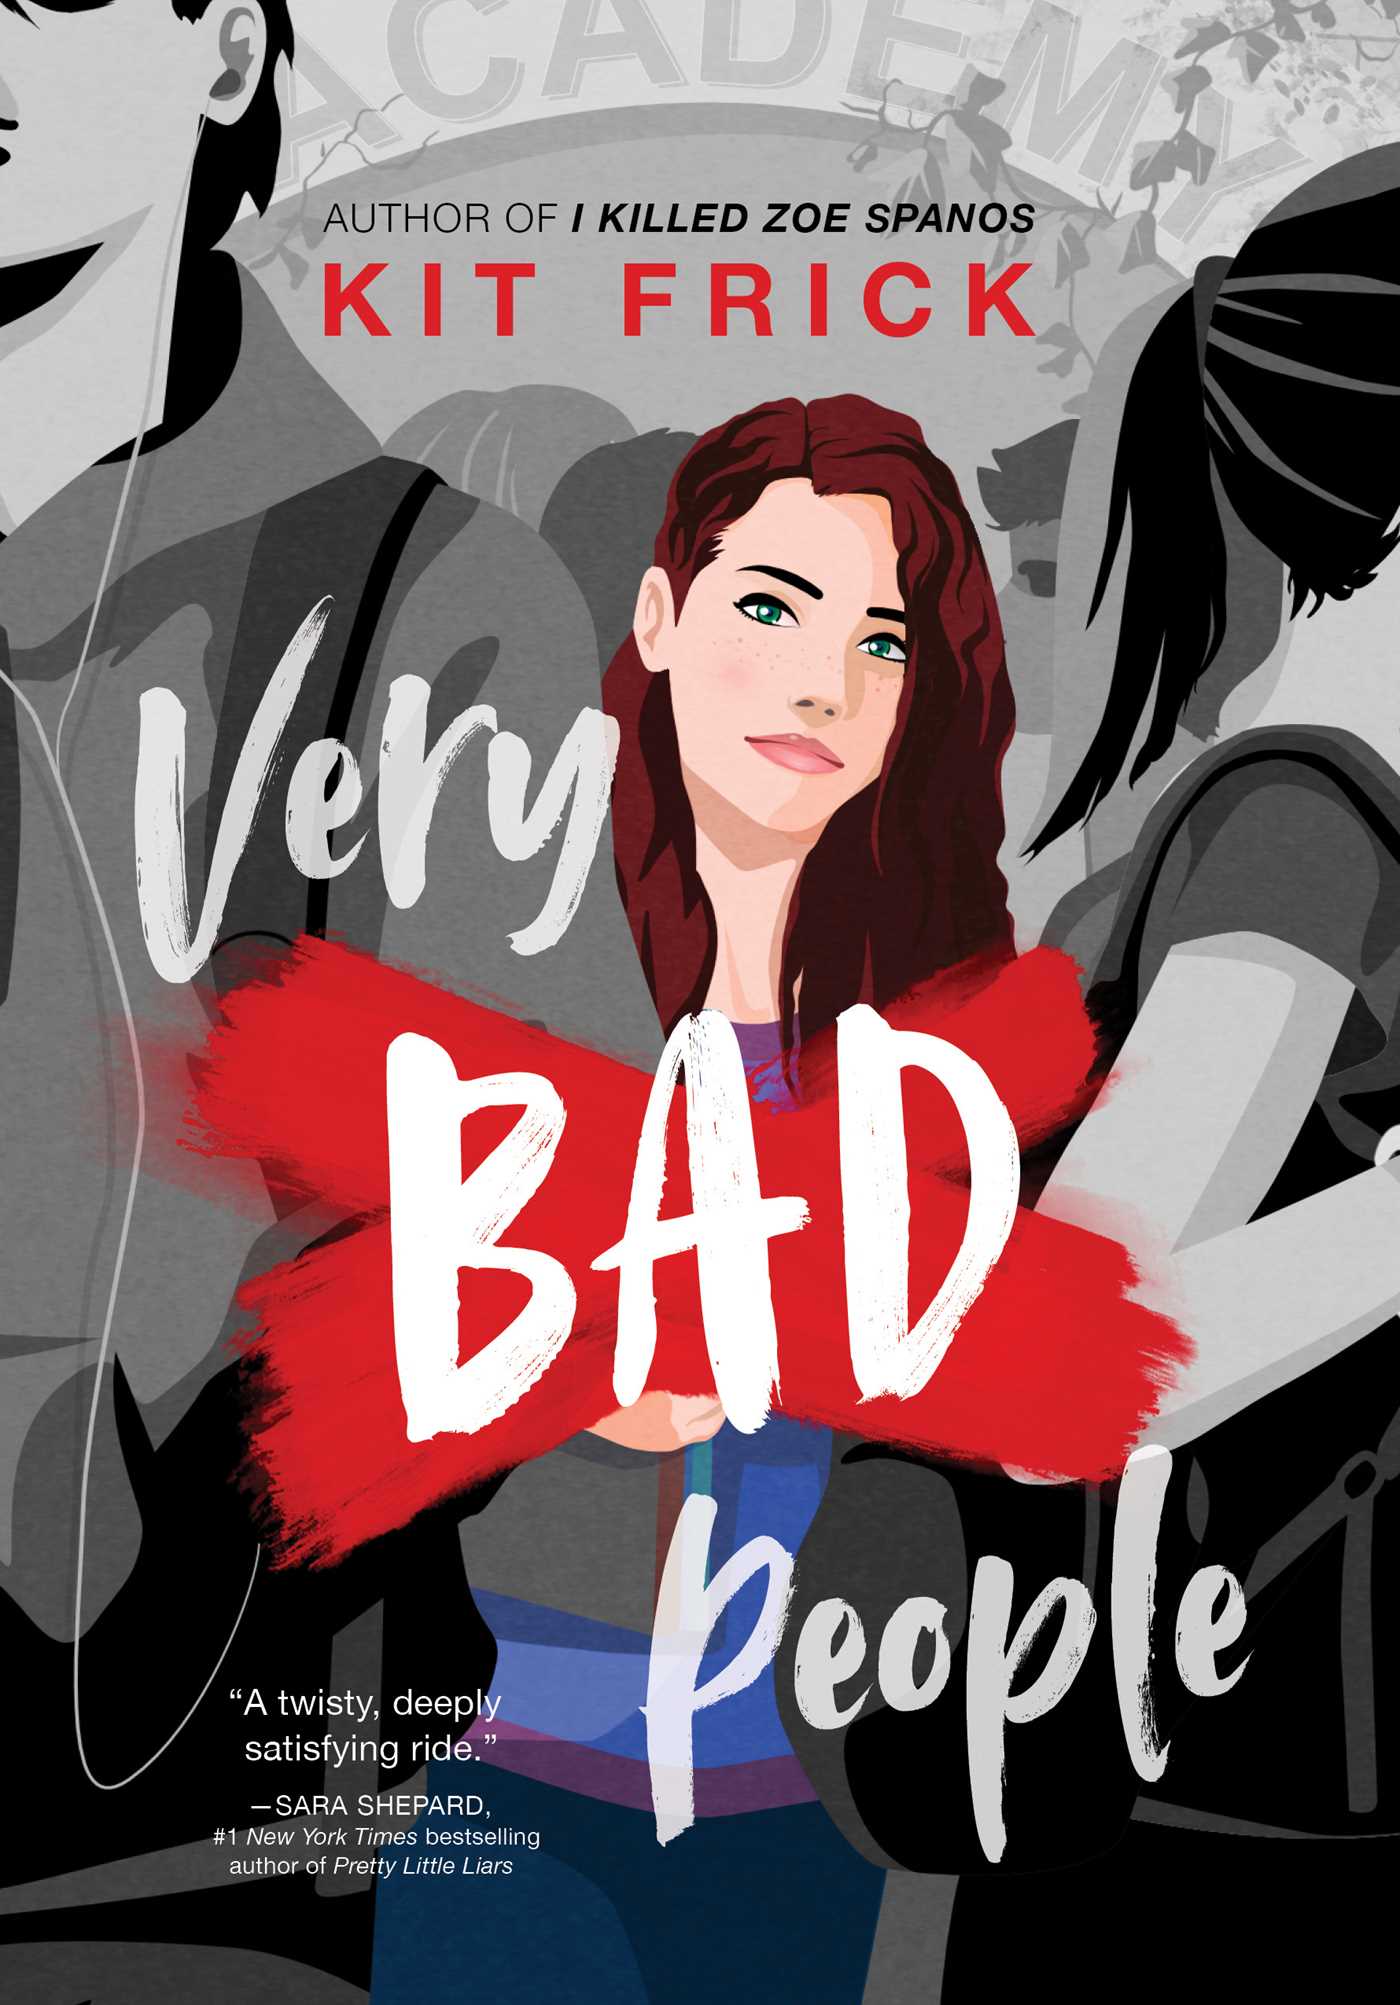 Image for "Very Bad People"